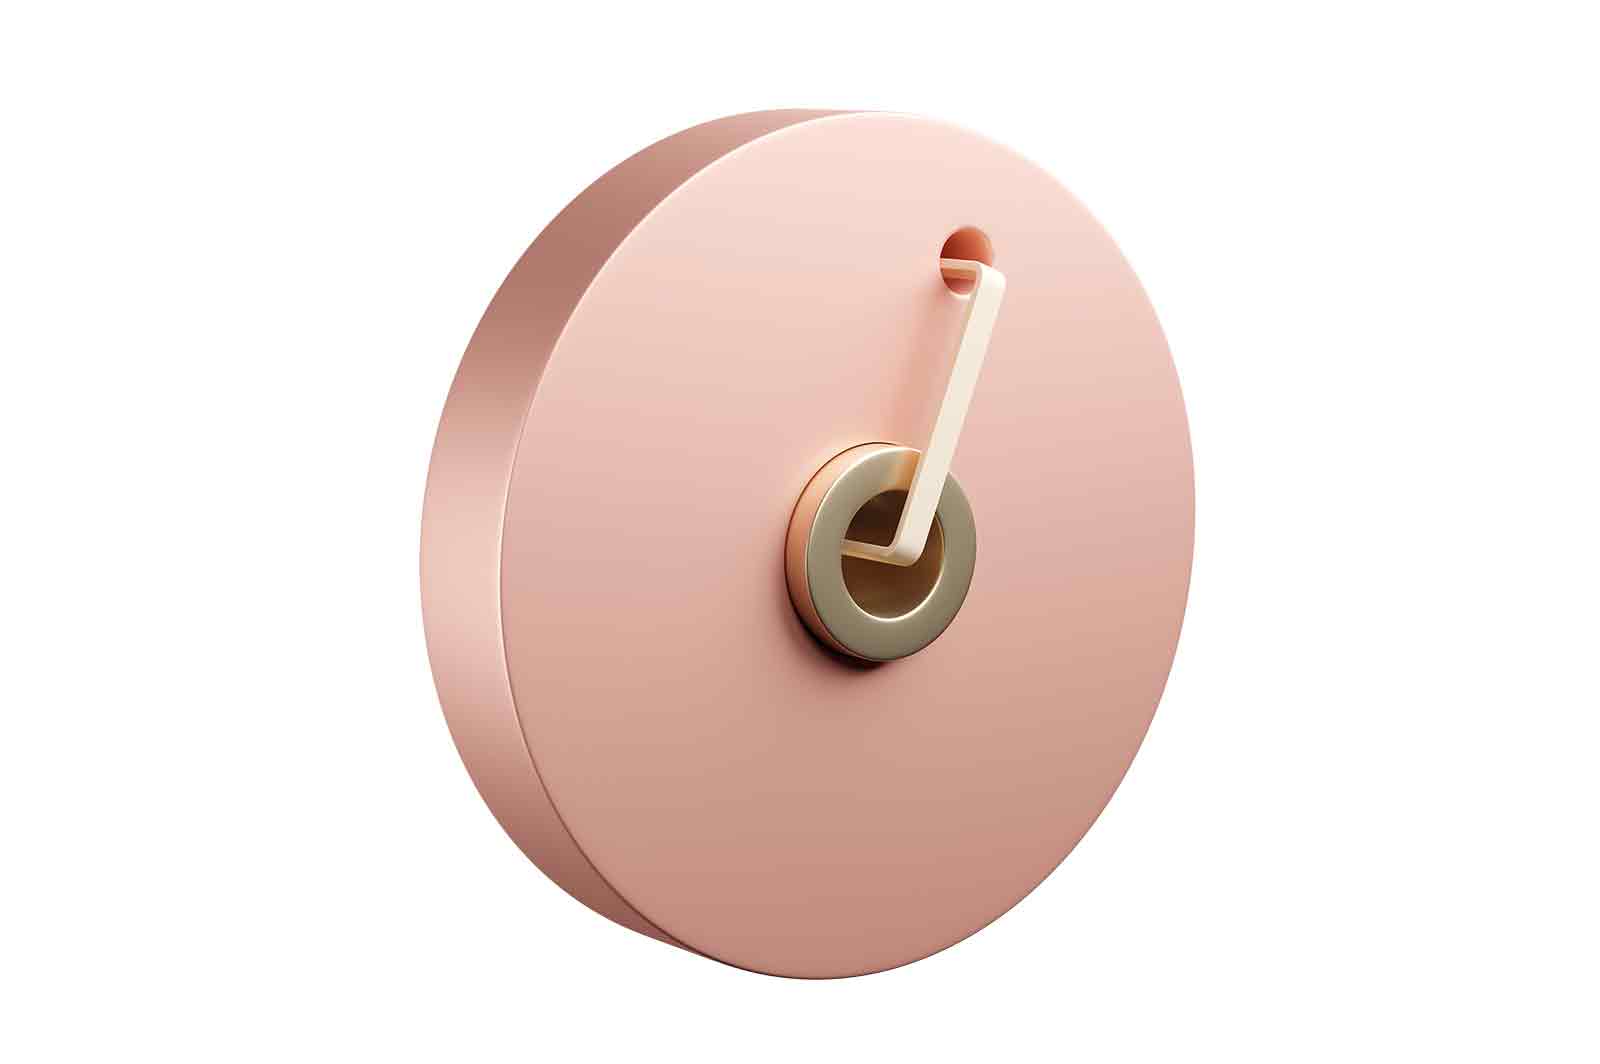 Abstract pink round shaped metal detail 3d rendered illustration. Metal component of single mechanism concept